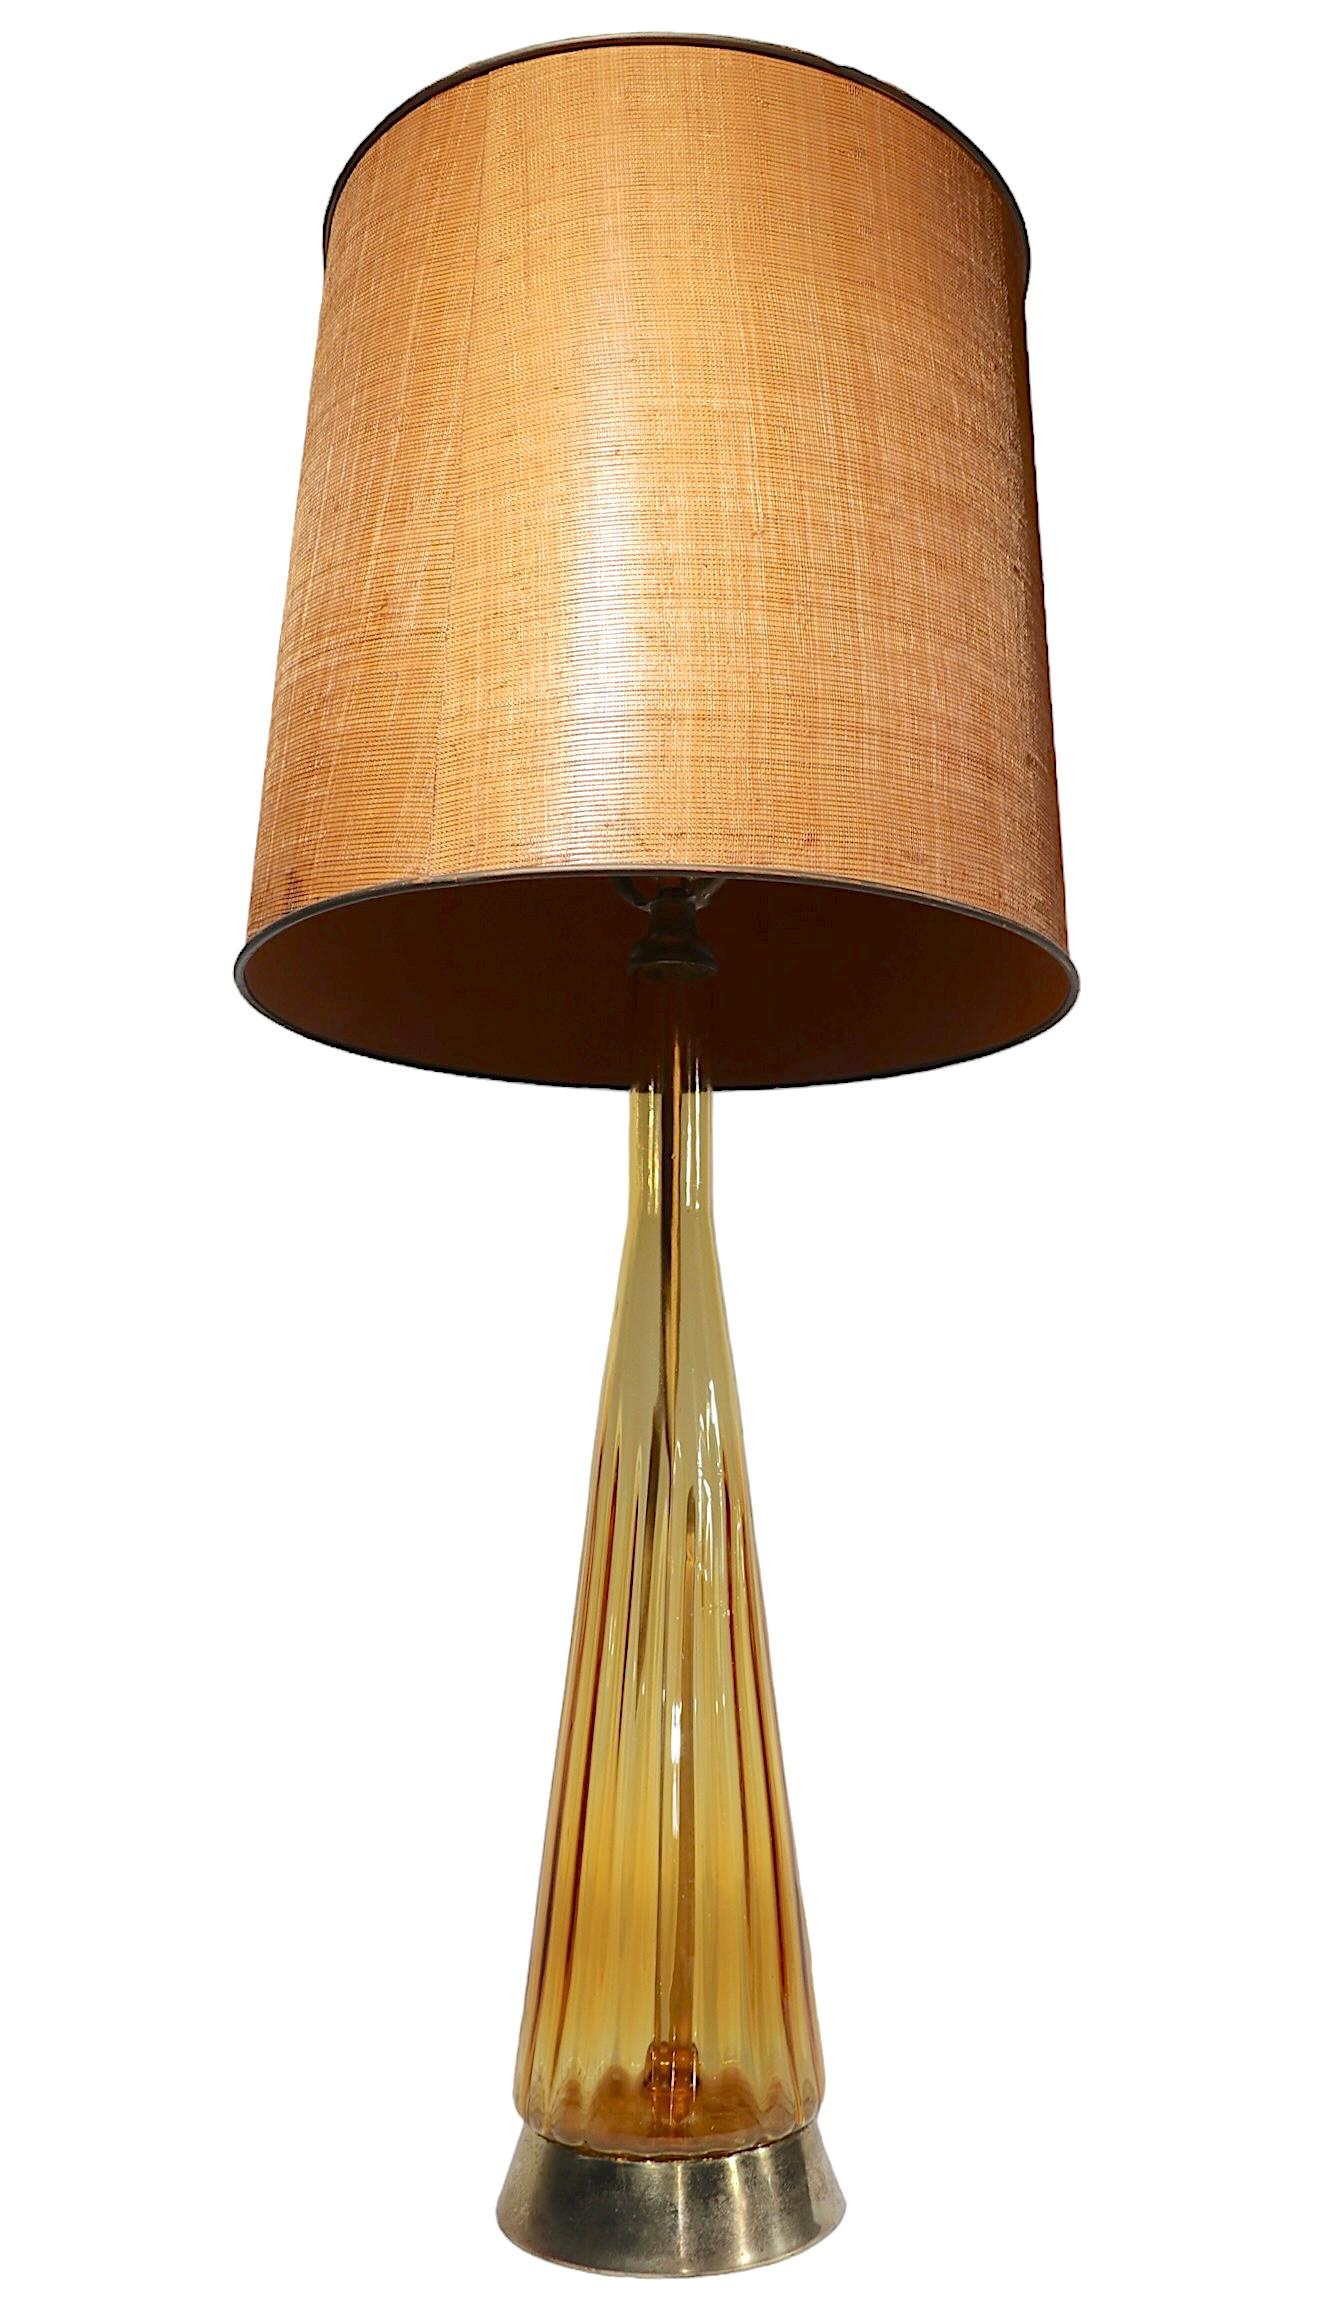 Mid Century  table lamp, having an elongated amber glass bottle form body, on a metal plinth base. The lamp is in very good, original, clean and working condition, showing only light cosmetic wear, normal and consistent with age, shade not included.